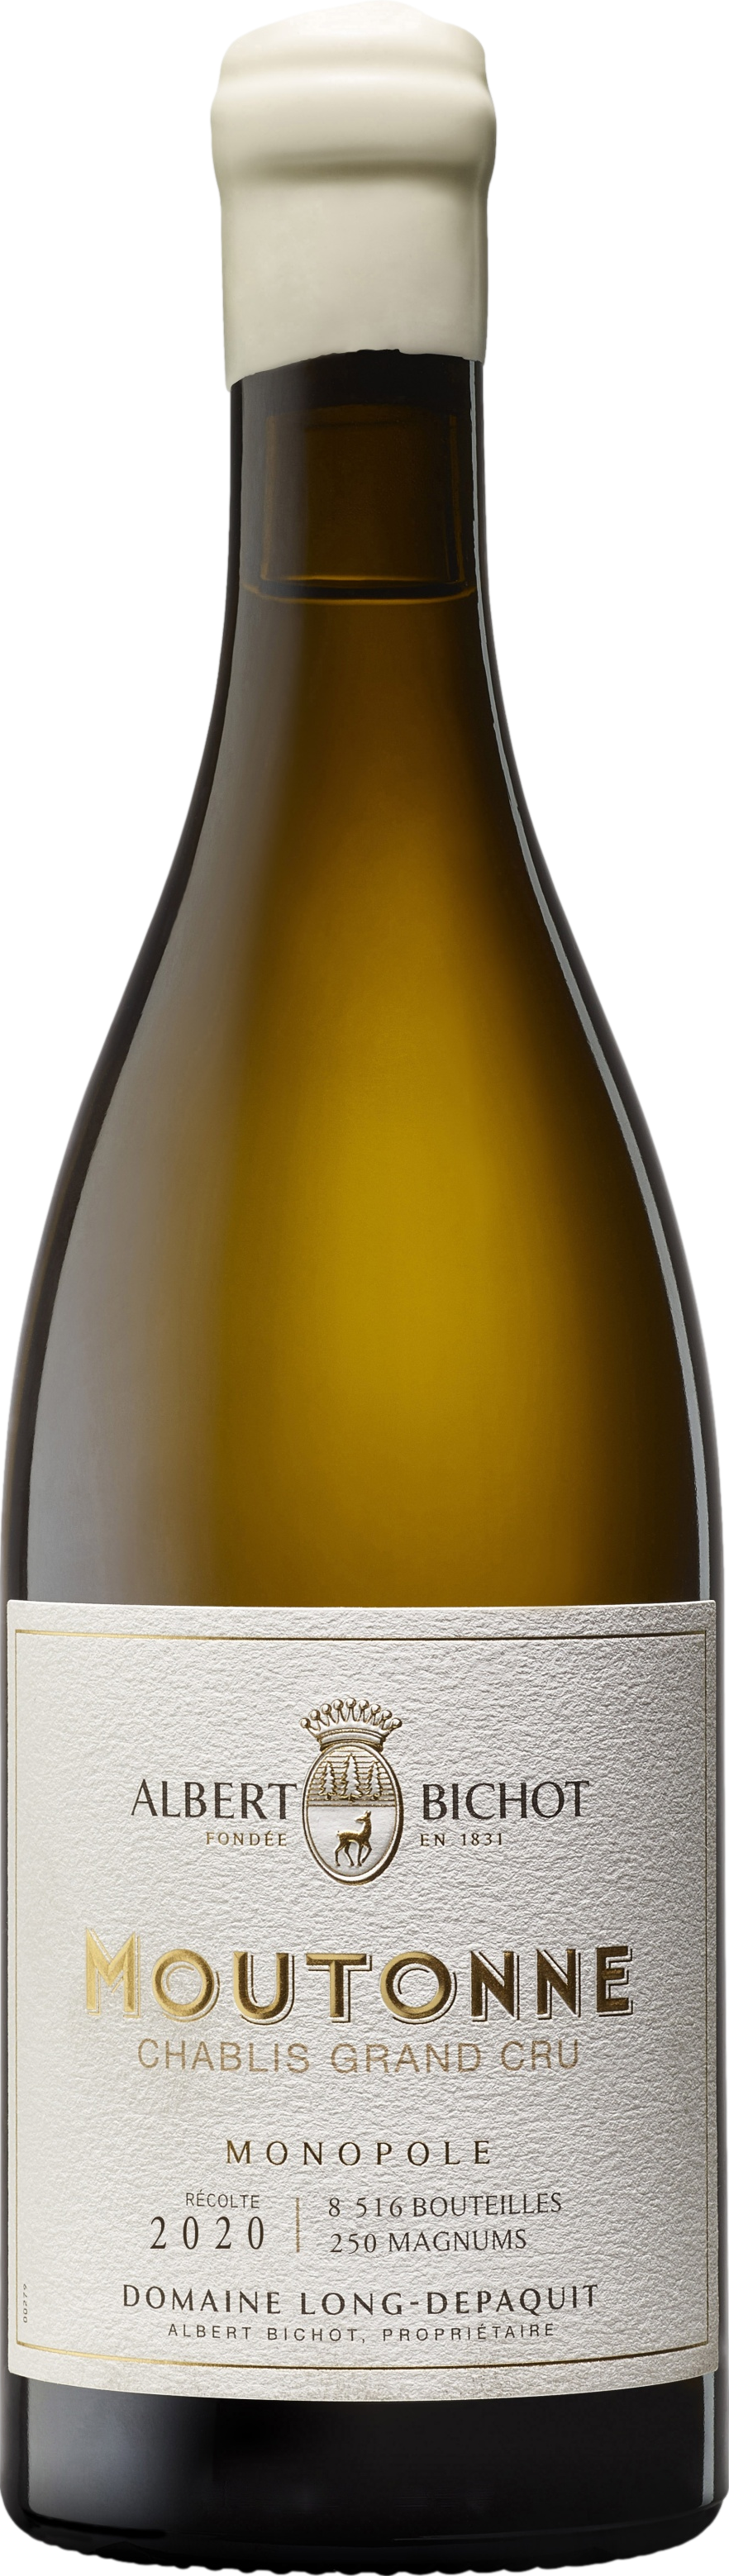 Product image of Albert Bichot Domaine Long-Depaquit Chablis Grand Cru Moutonne Monopole 2020 from 8wines